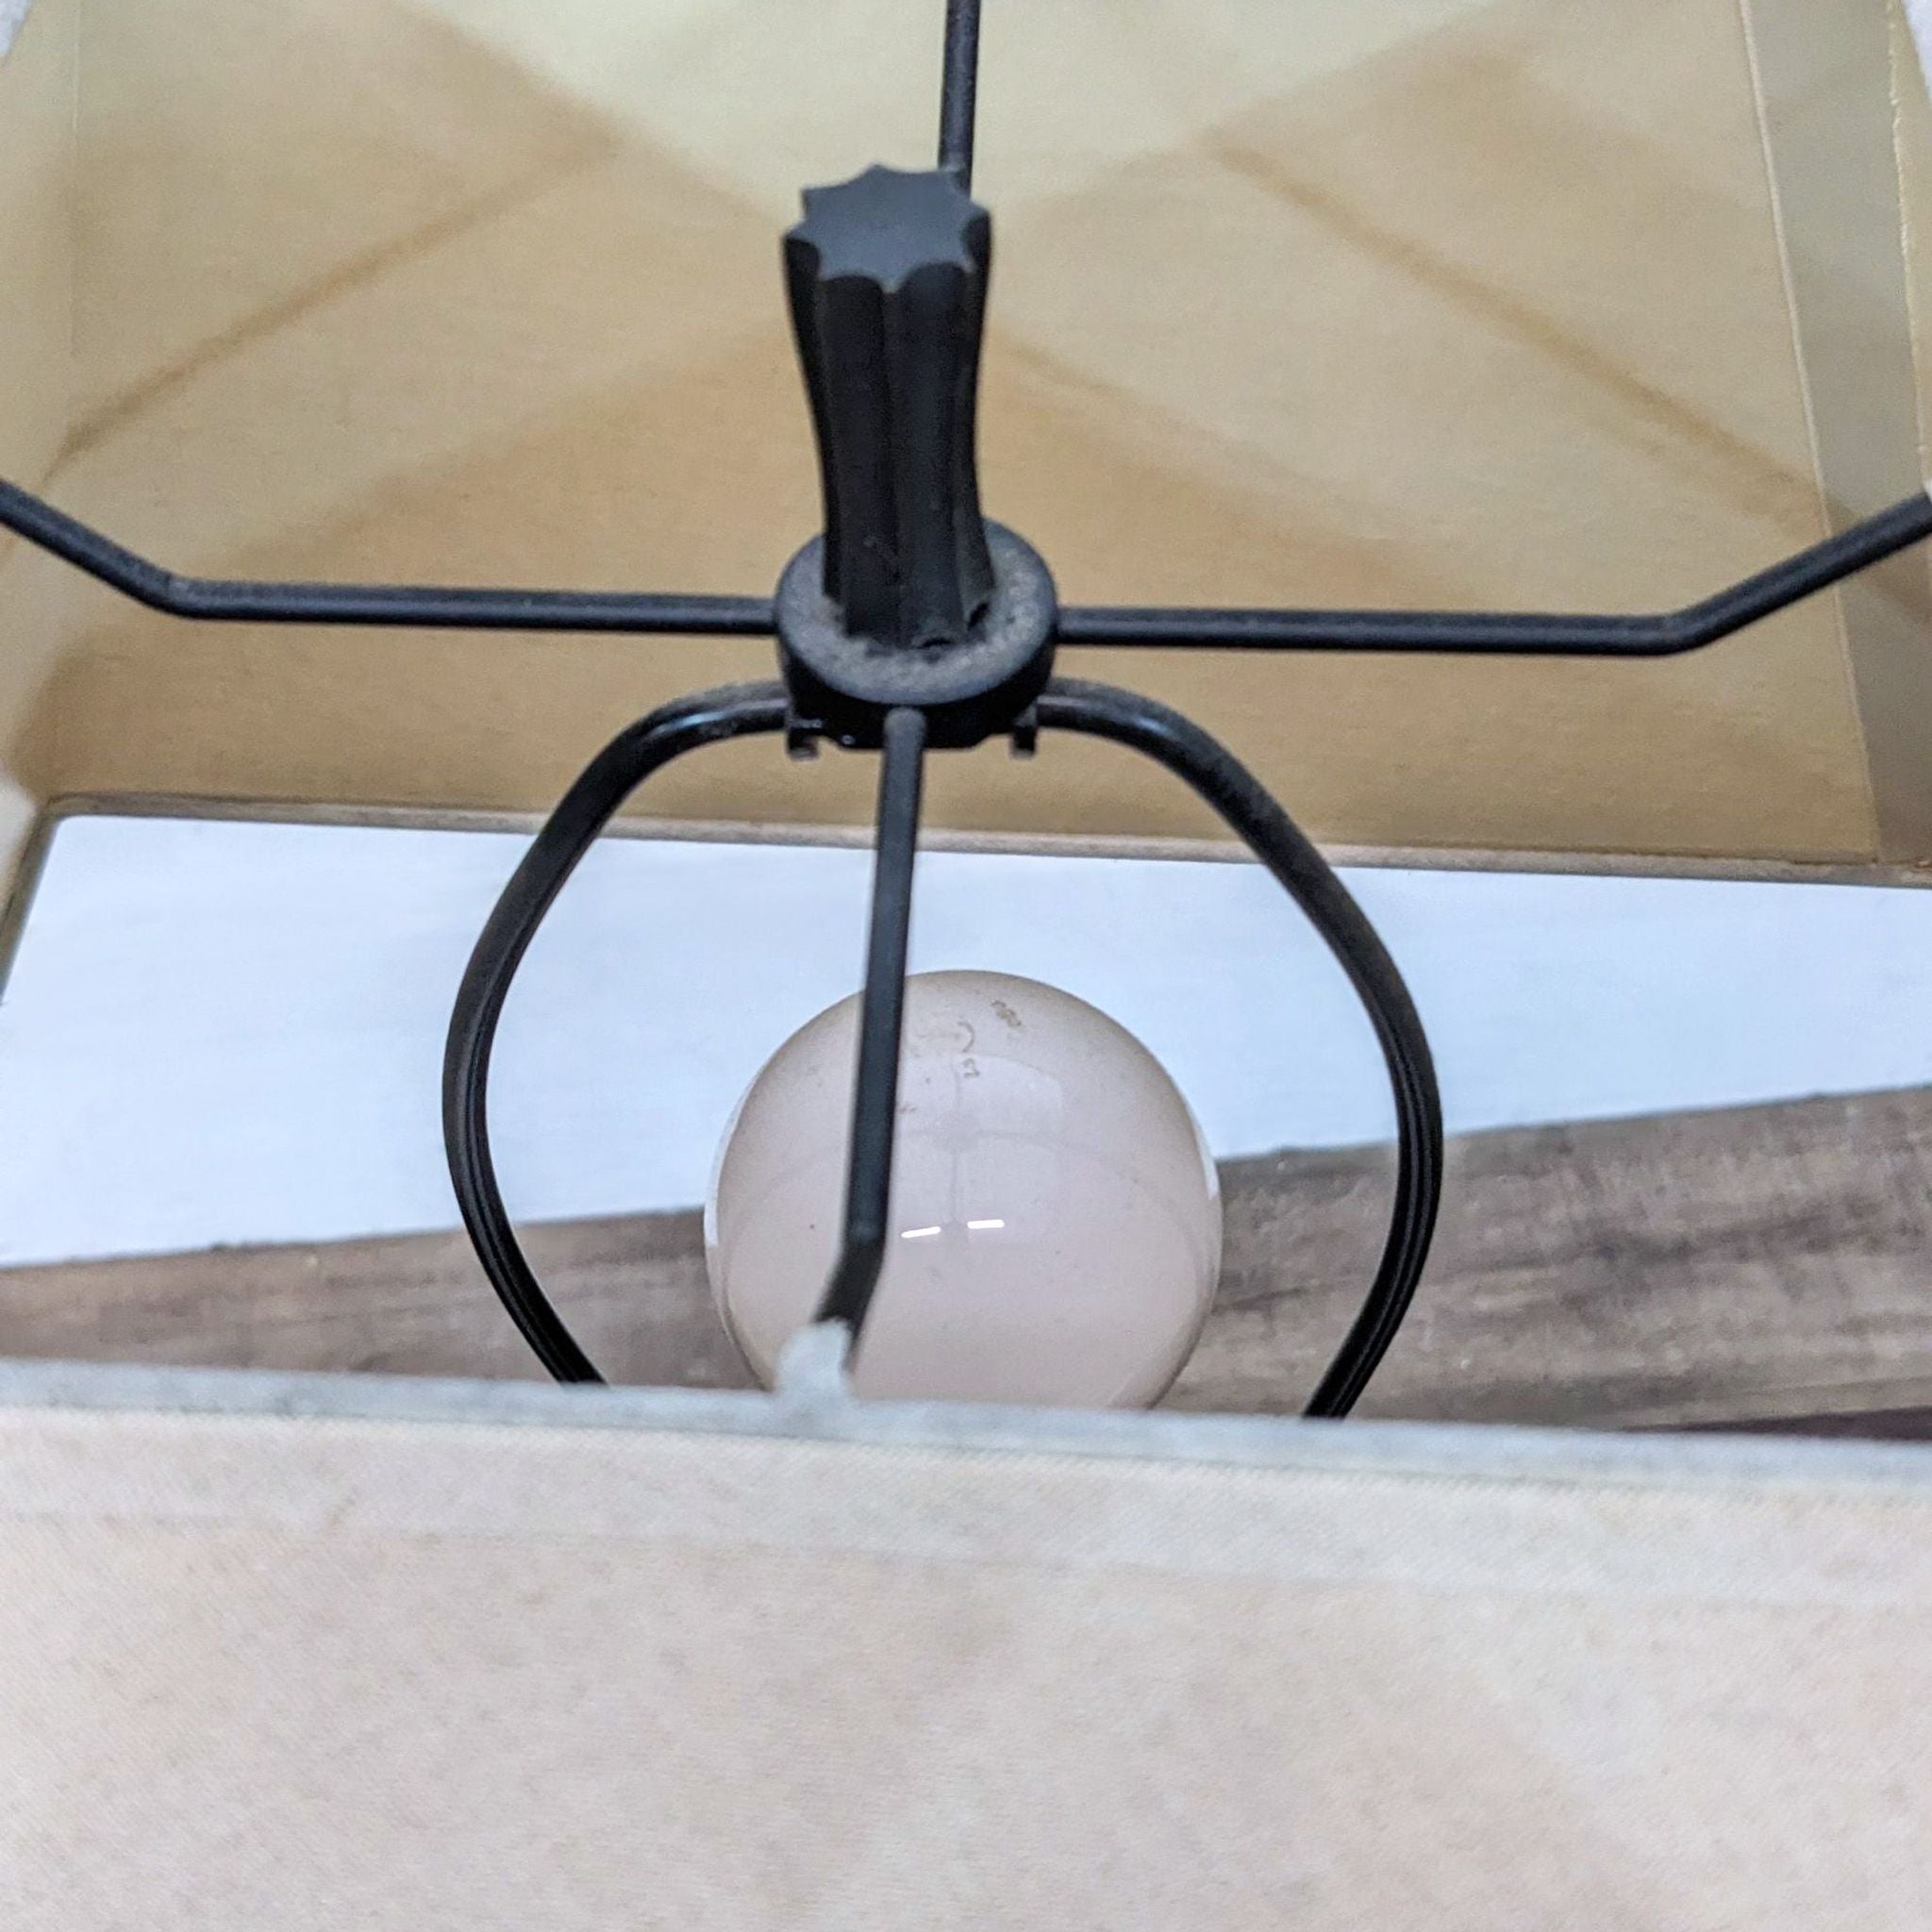 3. Close-up of a Crate & Barrel lampshade's underside with a light bulb and metallic holder structure inside.